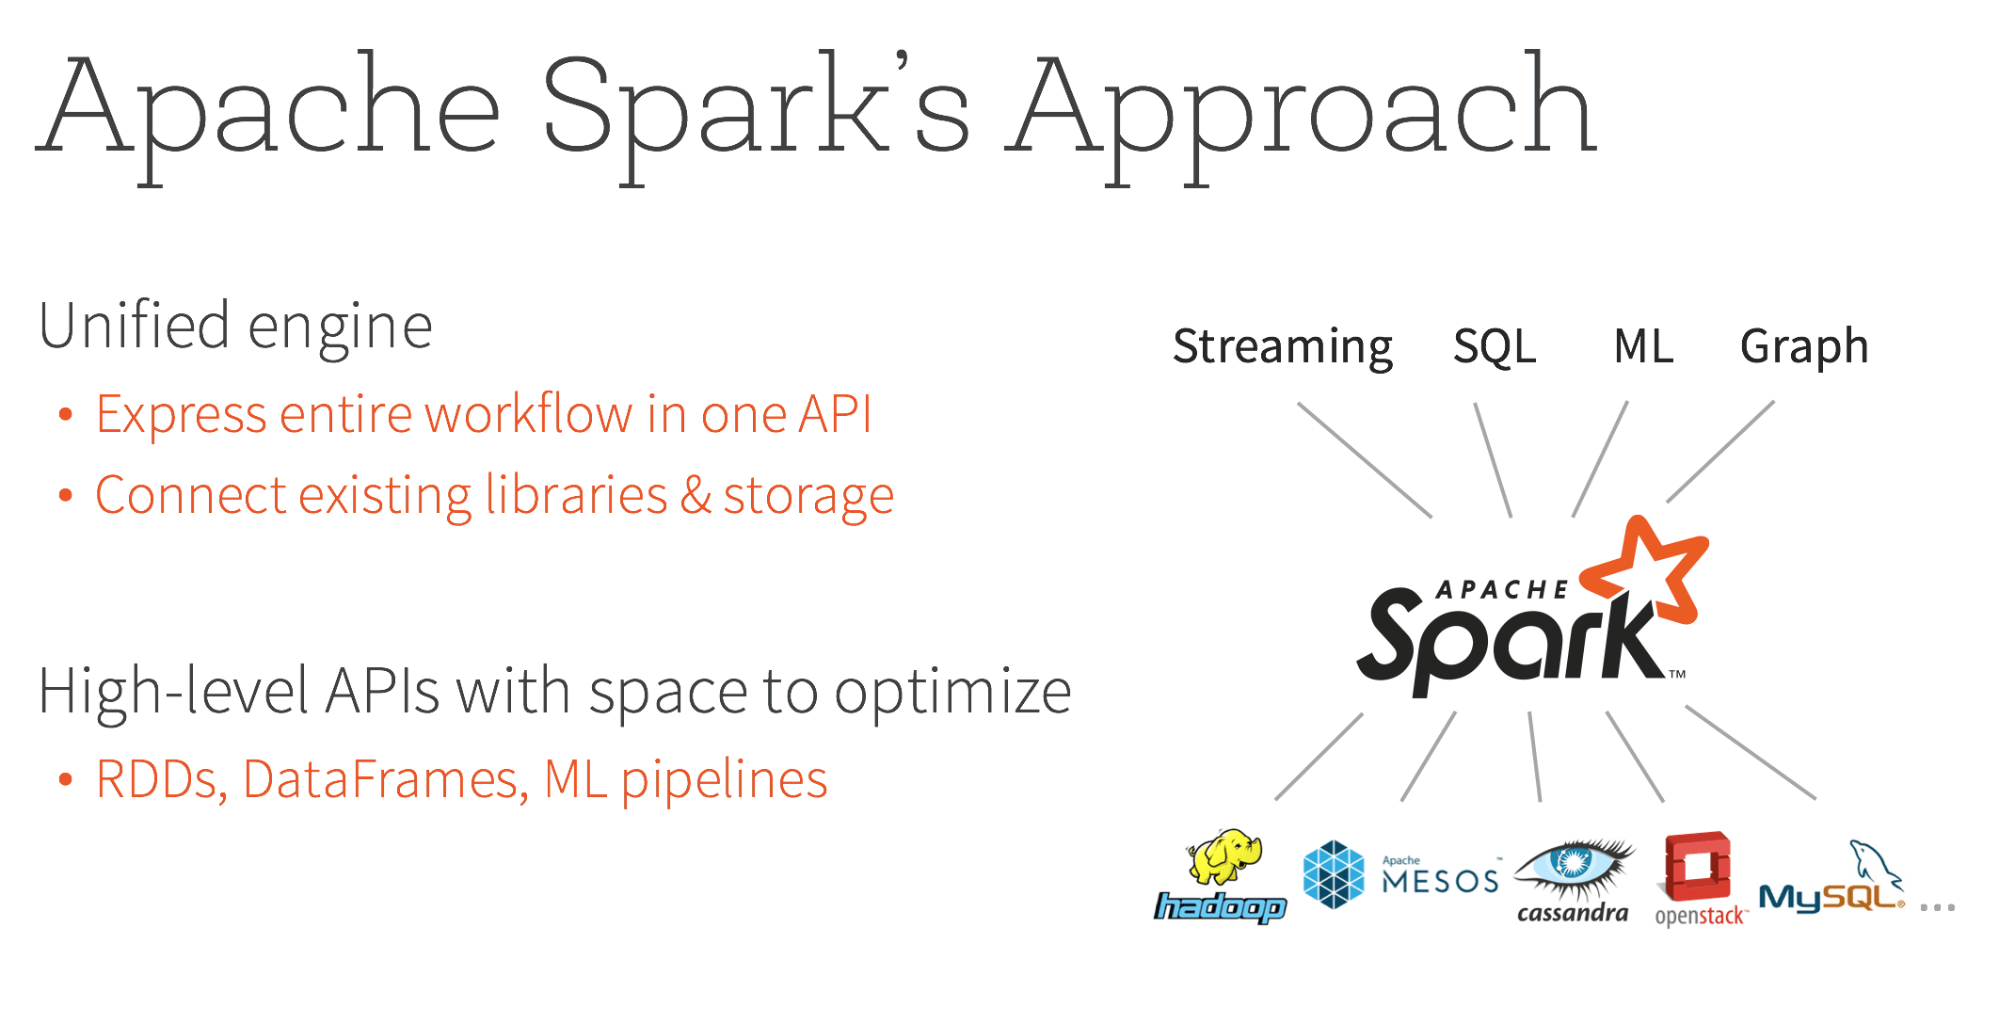 Outline of Apache Spark's approach to simplify writing big data applications